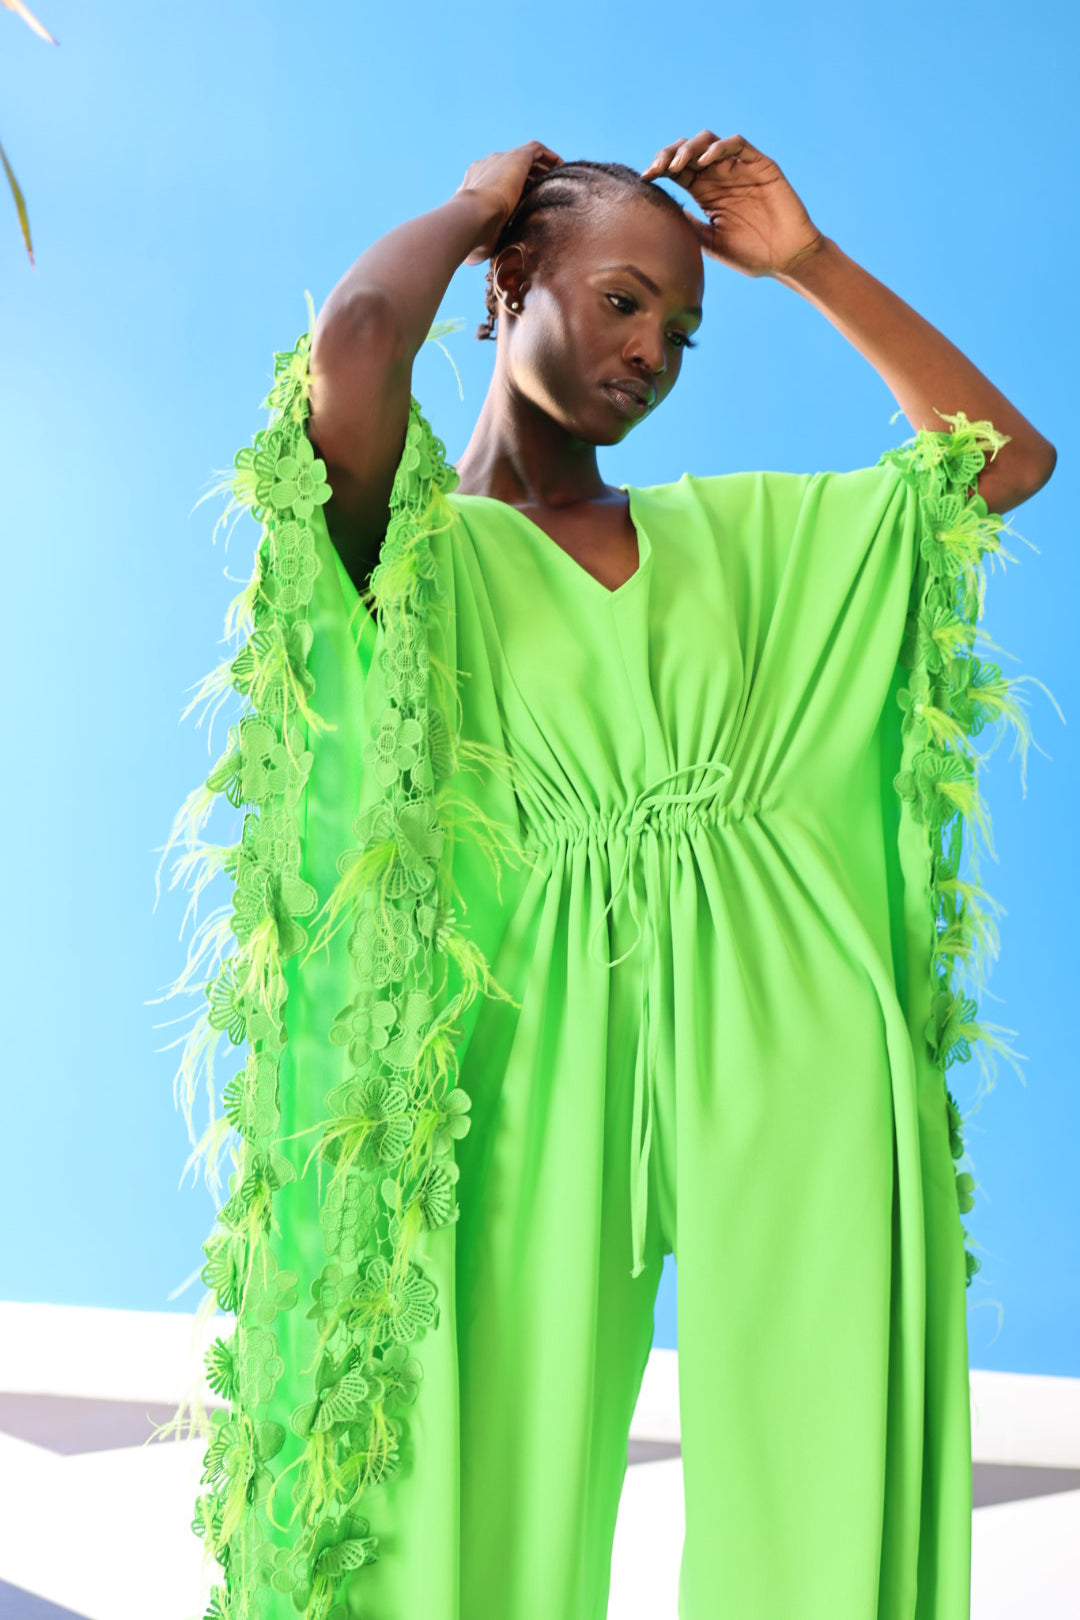 The Poppy Floral Jumpsuit in Green has gorgeous floral lace at the edge of the fabric, along with faux feathers that create a fun texture. Style this for a night out with strapped up heels or for a casual outing with comfortable tennis shoes.